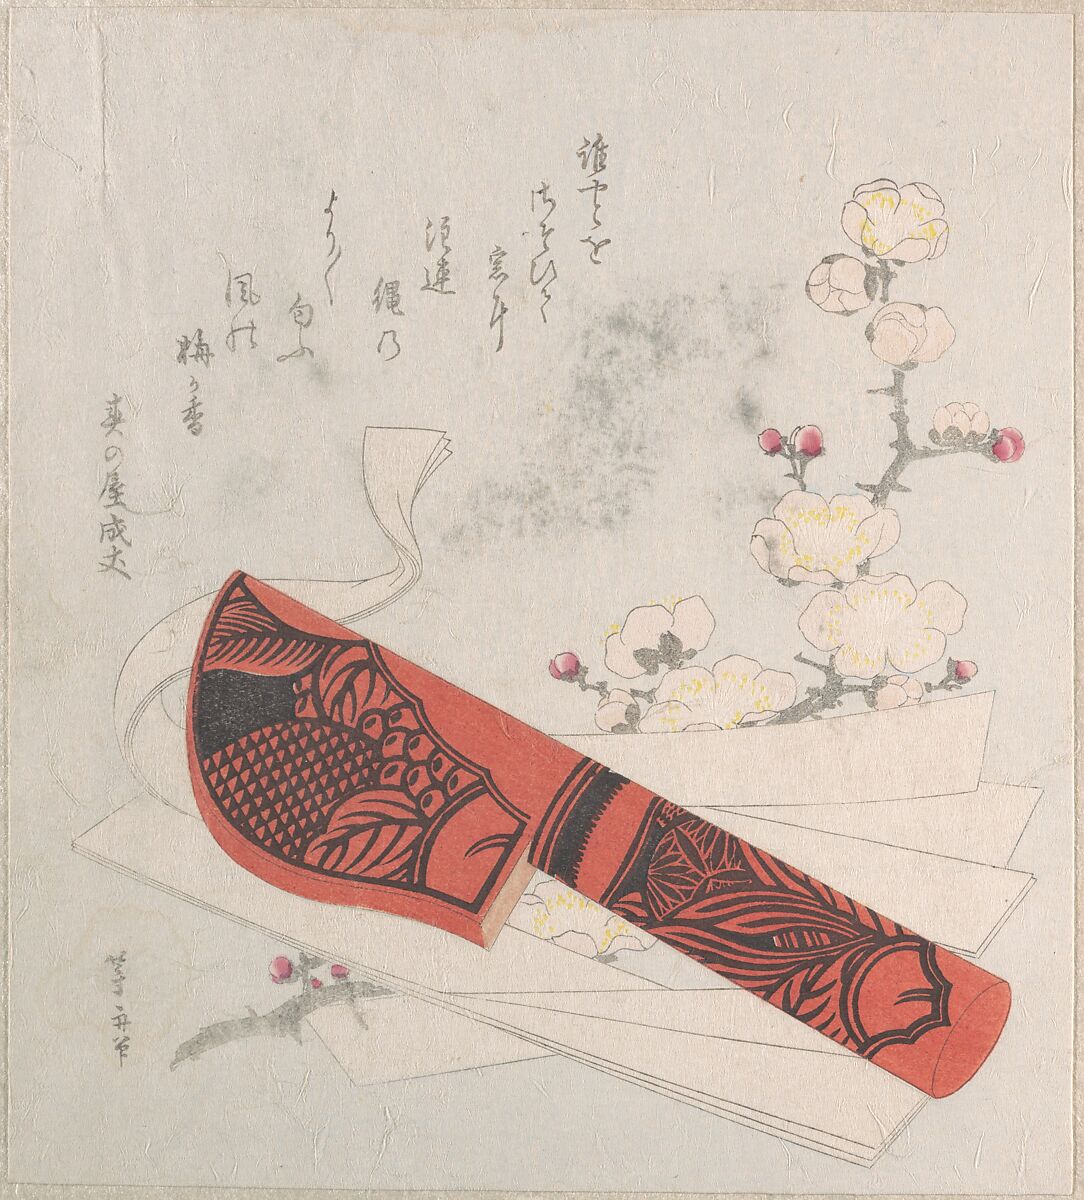 Plum Blossoms, Cut Paper and a Knife in Sheath, Uematsu Tōshū (Japanese, active late 1810s–20s), Woodblock print (surimono); ink and color on paper, Japan 